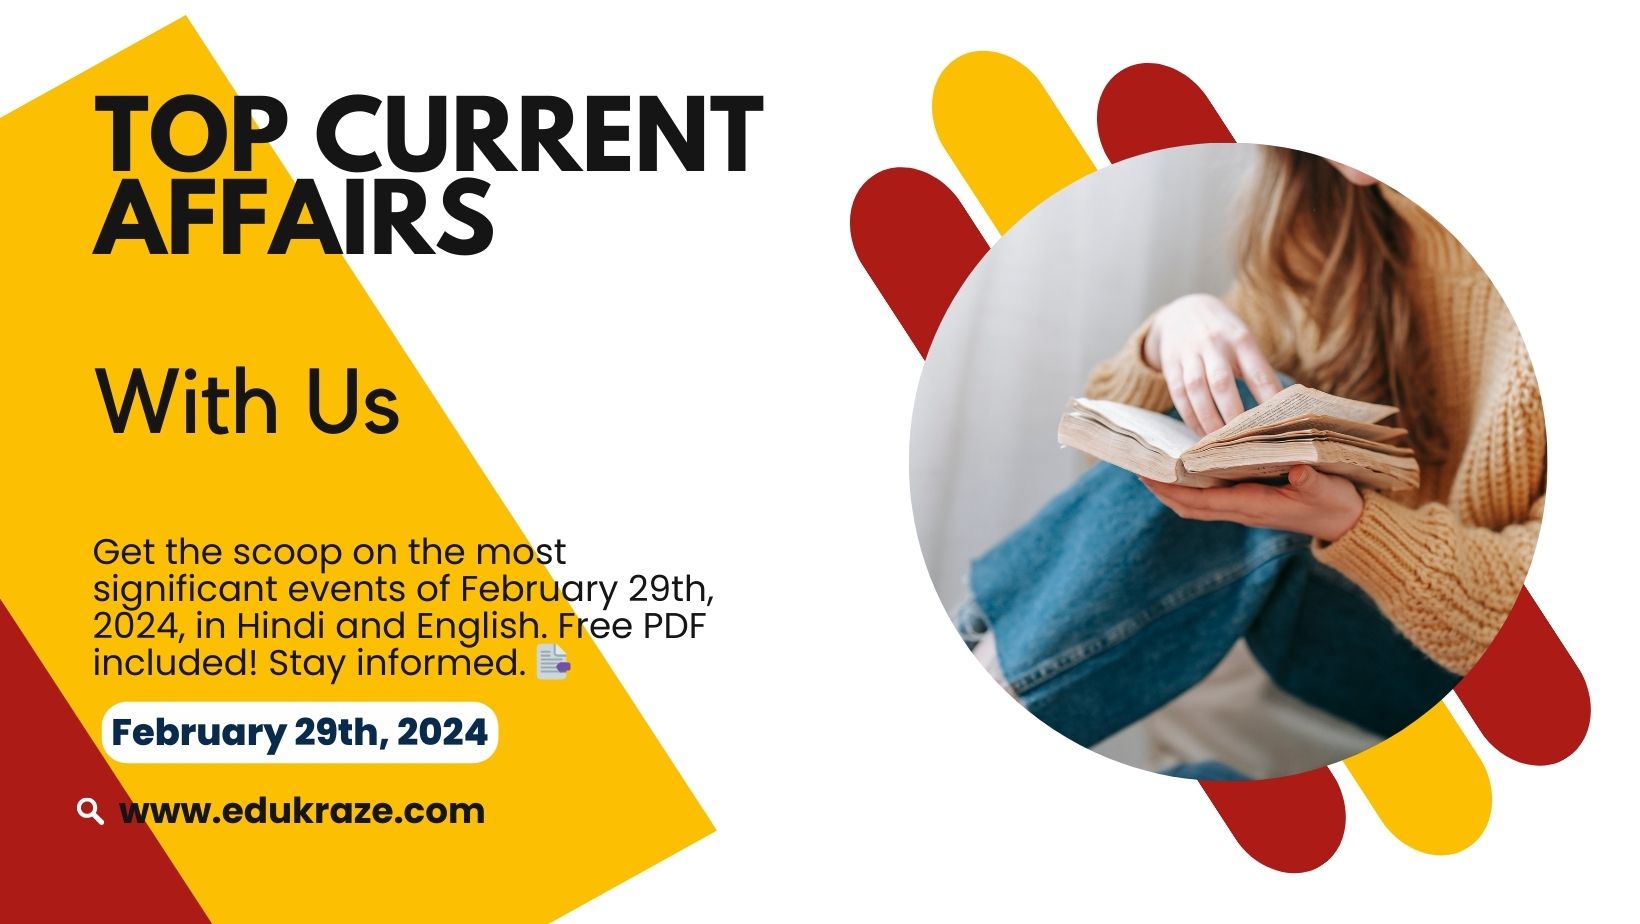 Today’s Top Current Affairs February 29th, 2024 | Hindi and English with Free PDF